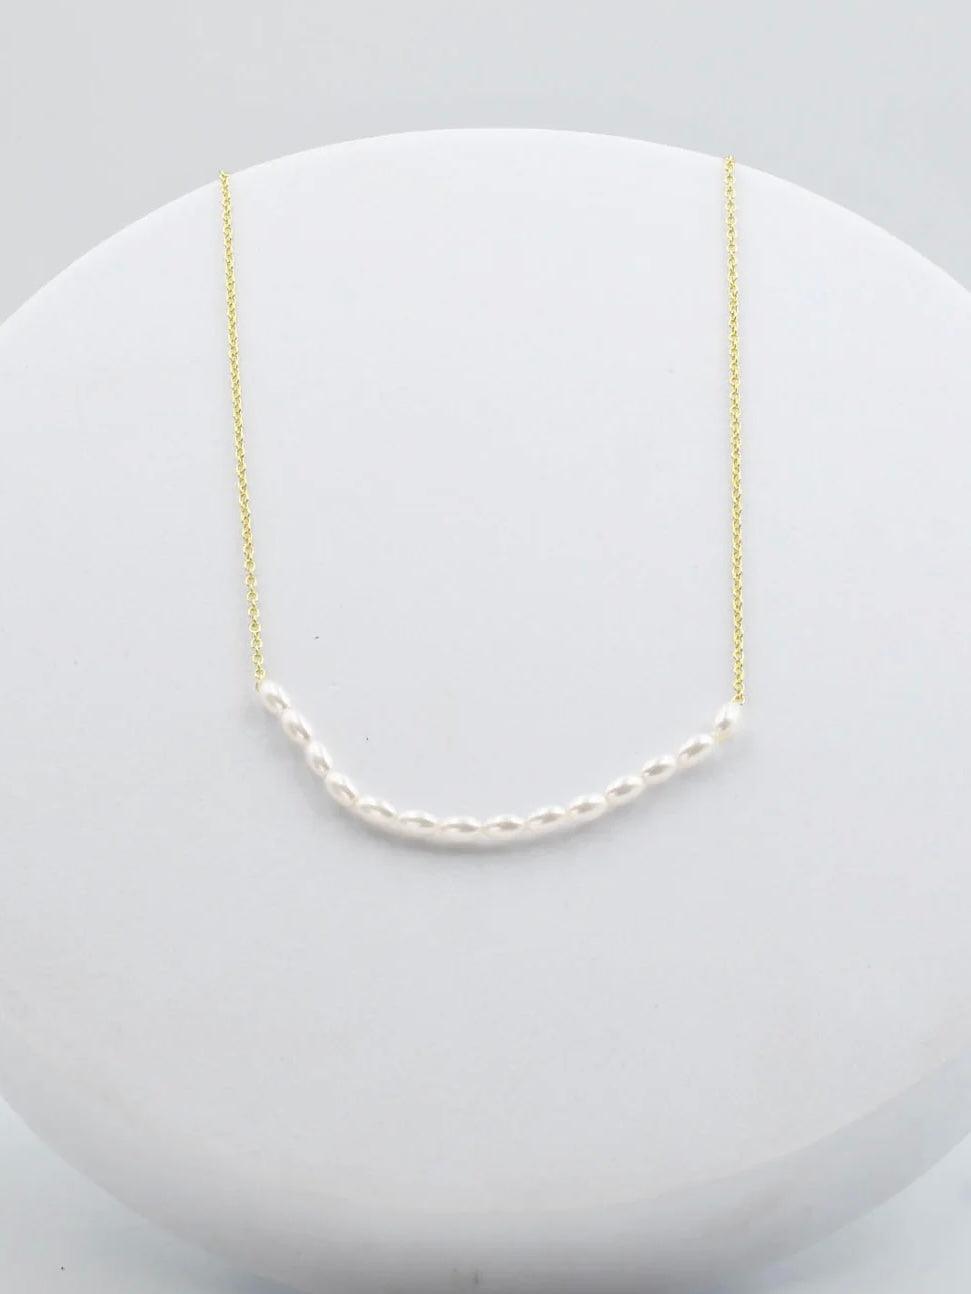 Gold and Pearl necklace 
Simple gold necklace 
